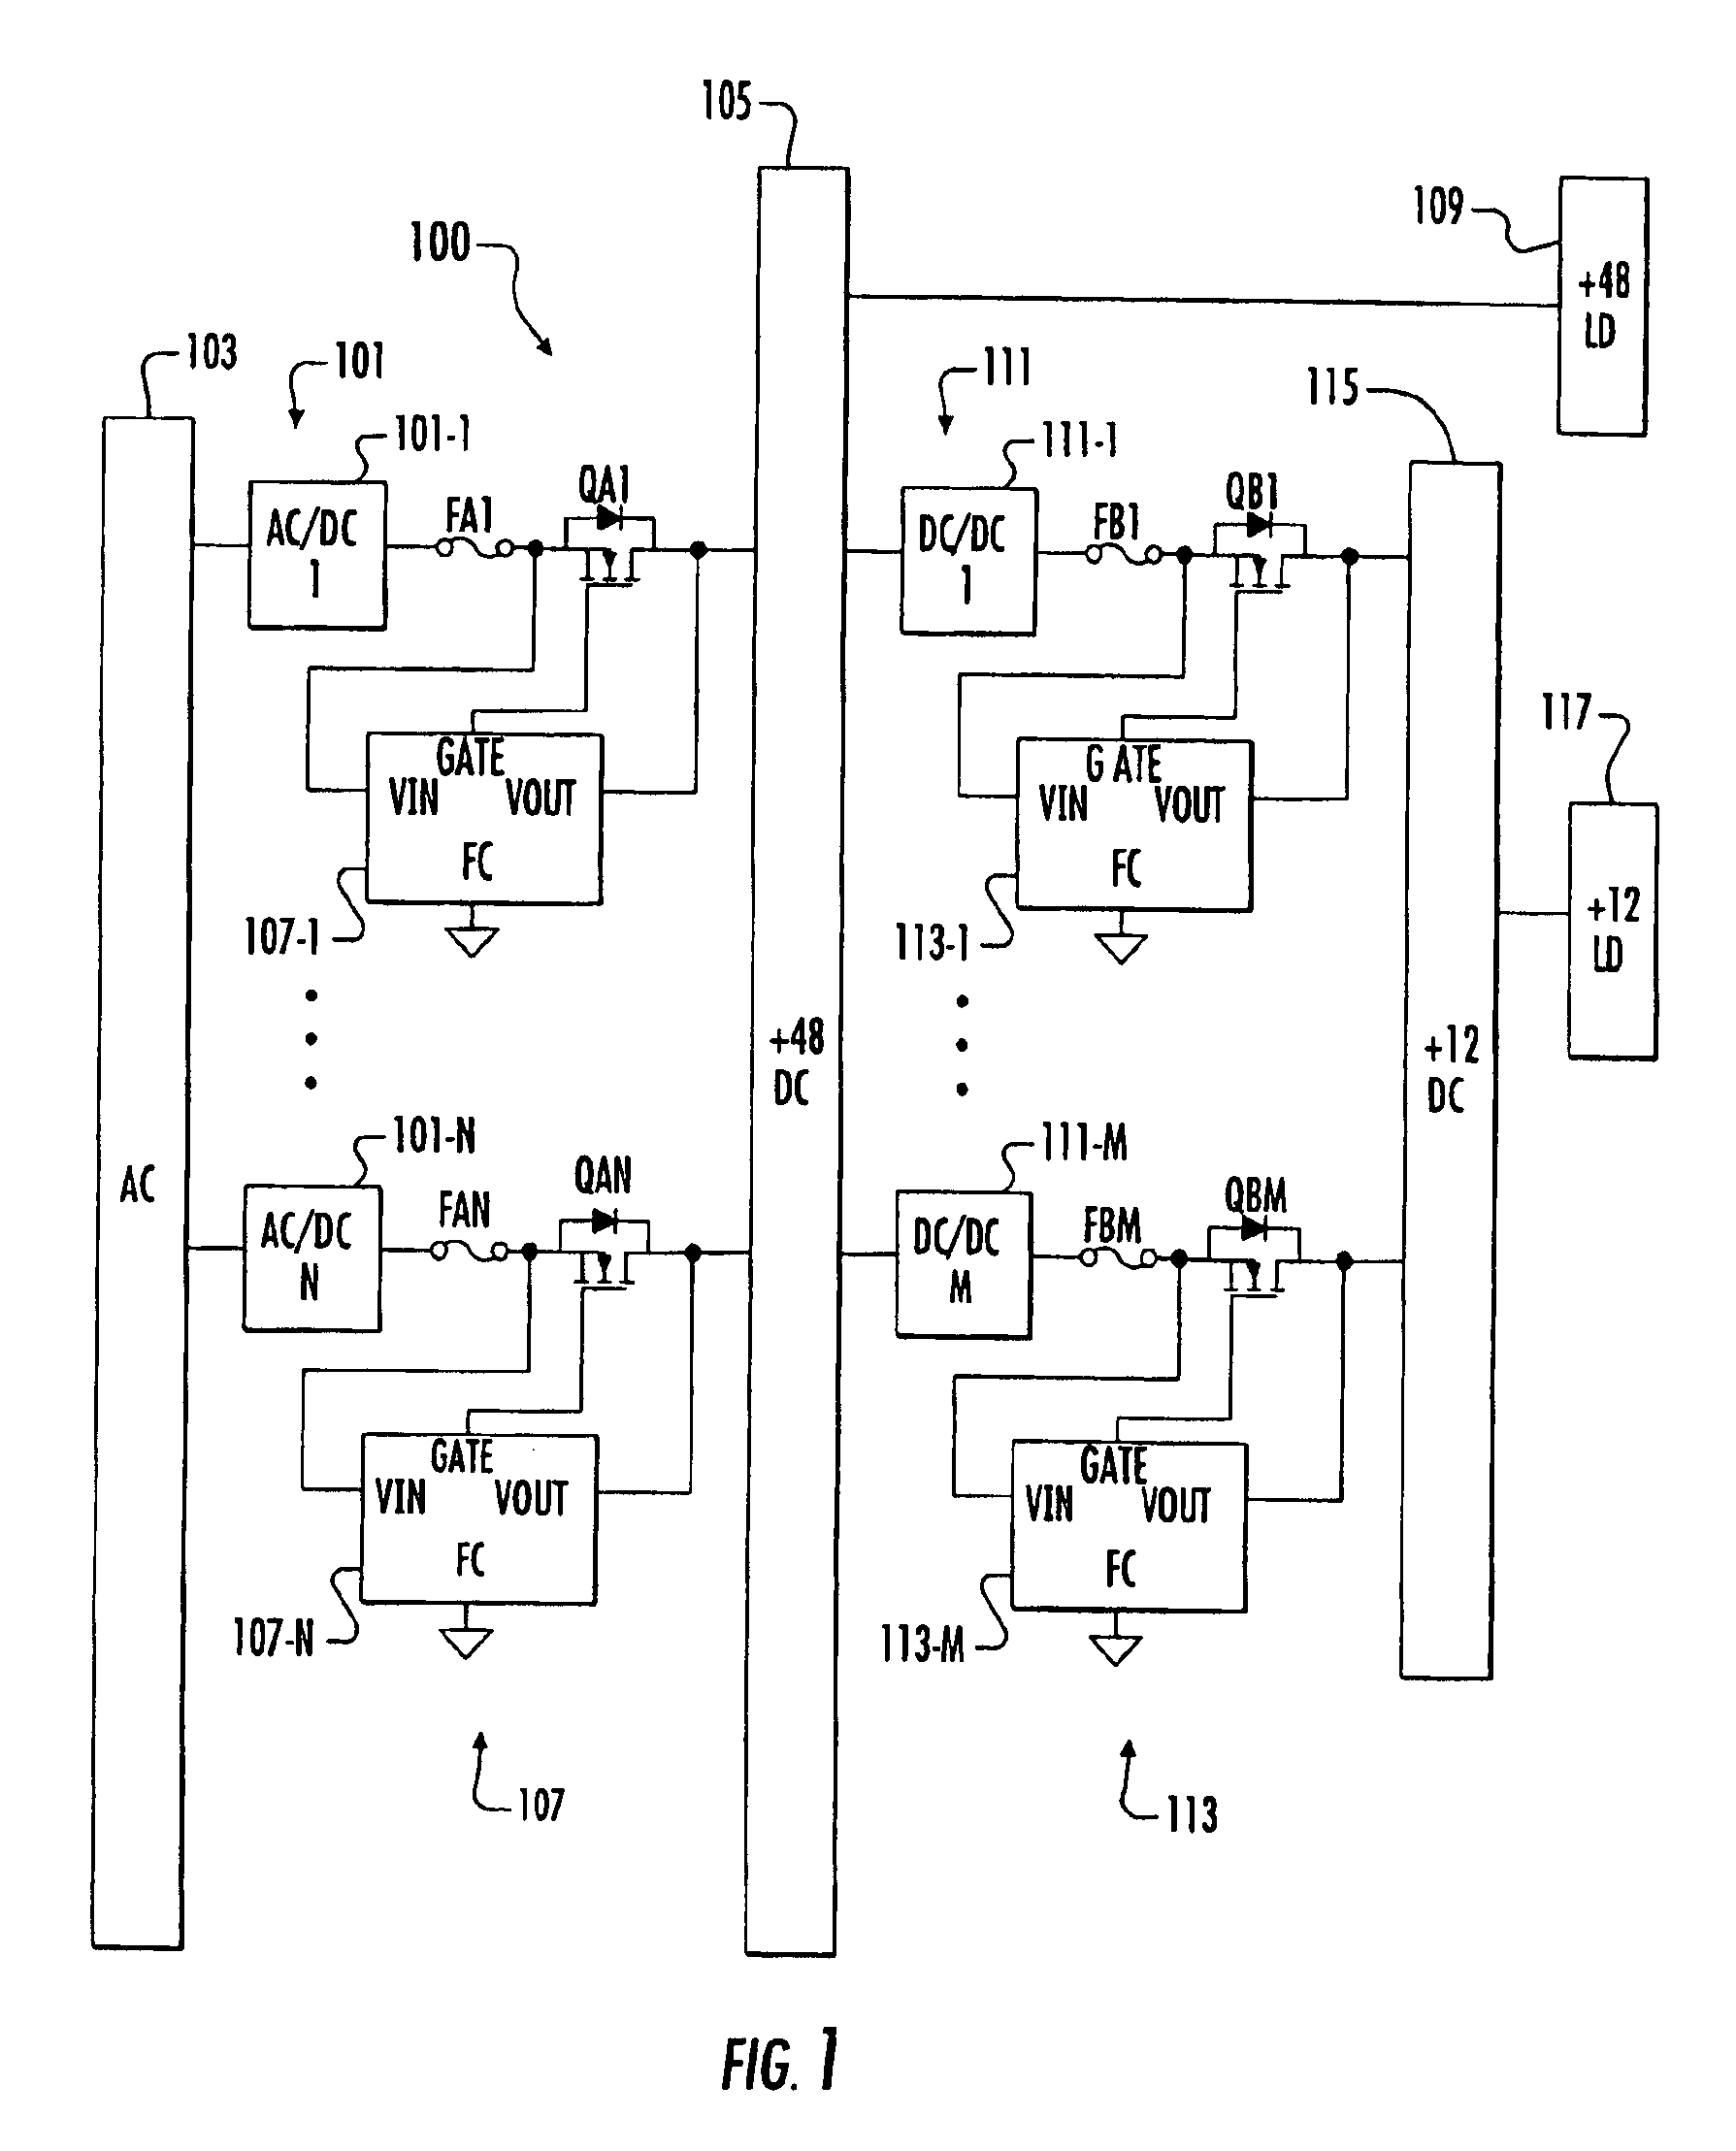 Controller for FET pass device